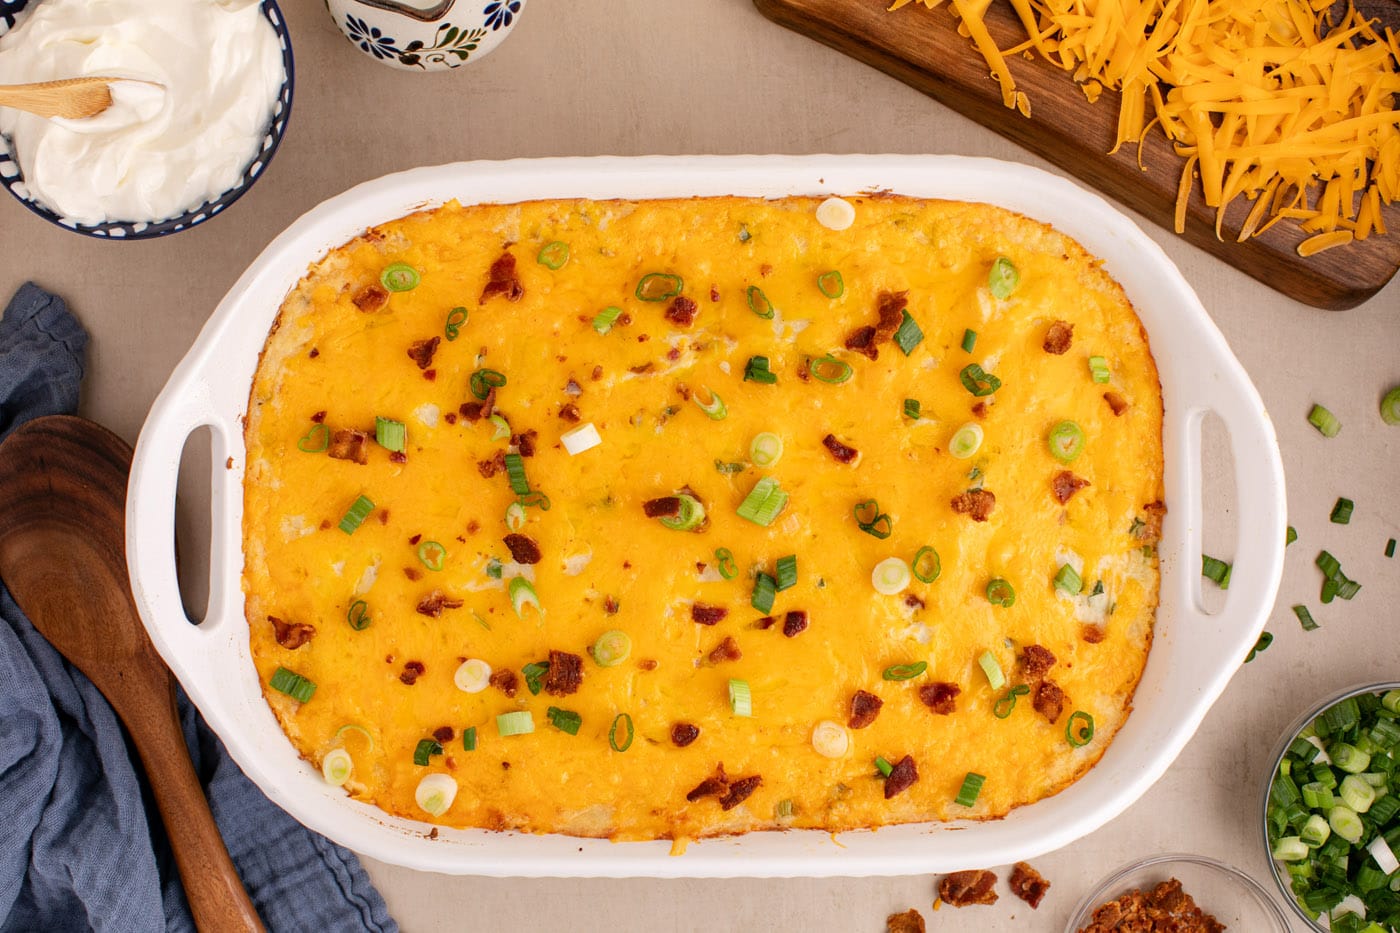 crumbled bacon and green onions on top of twice baked potato casserole